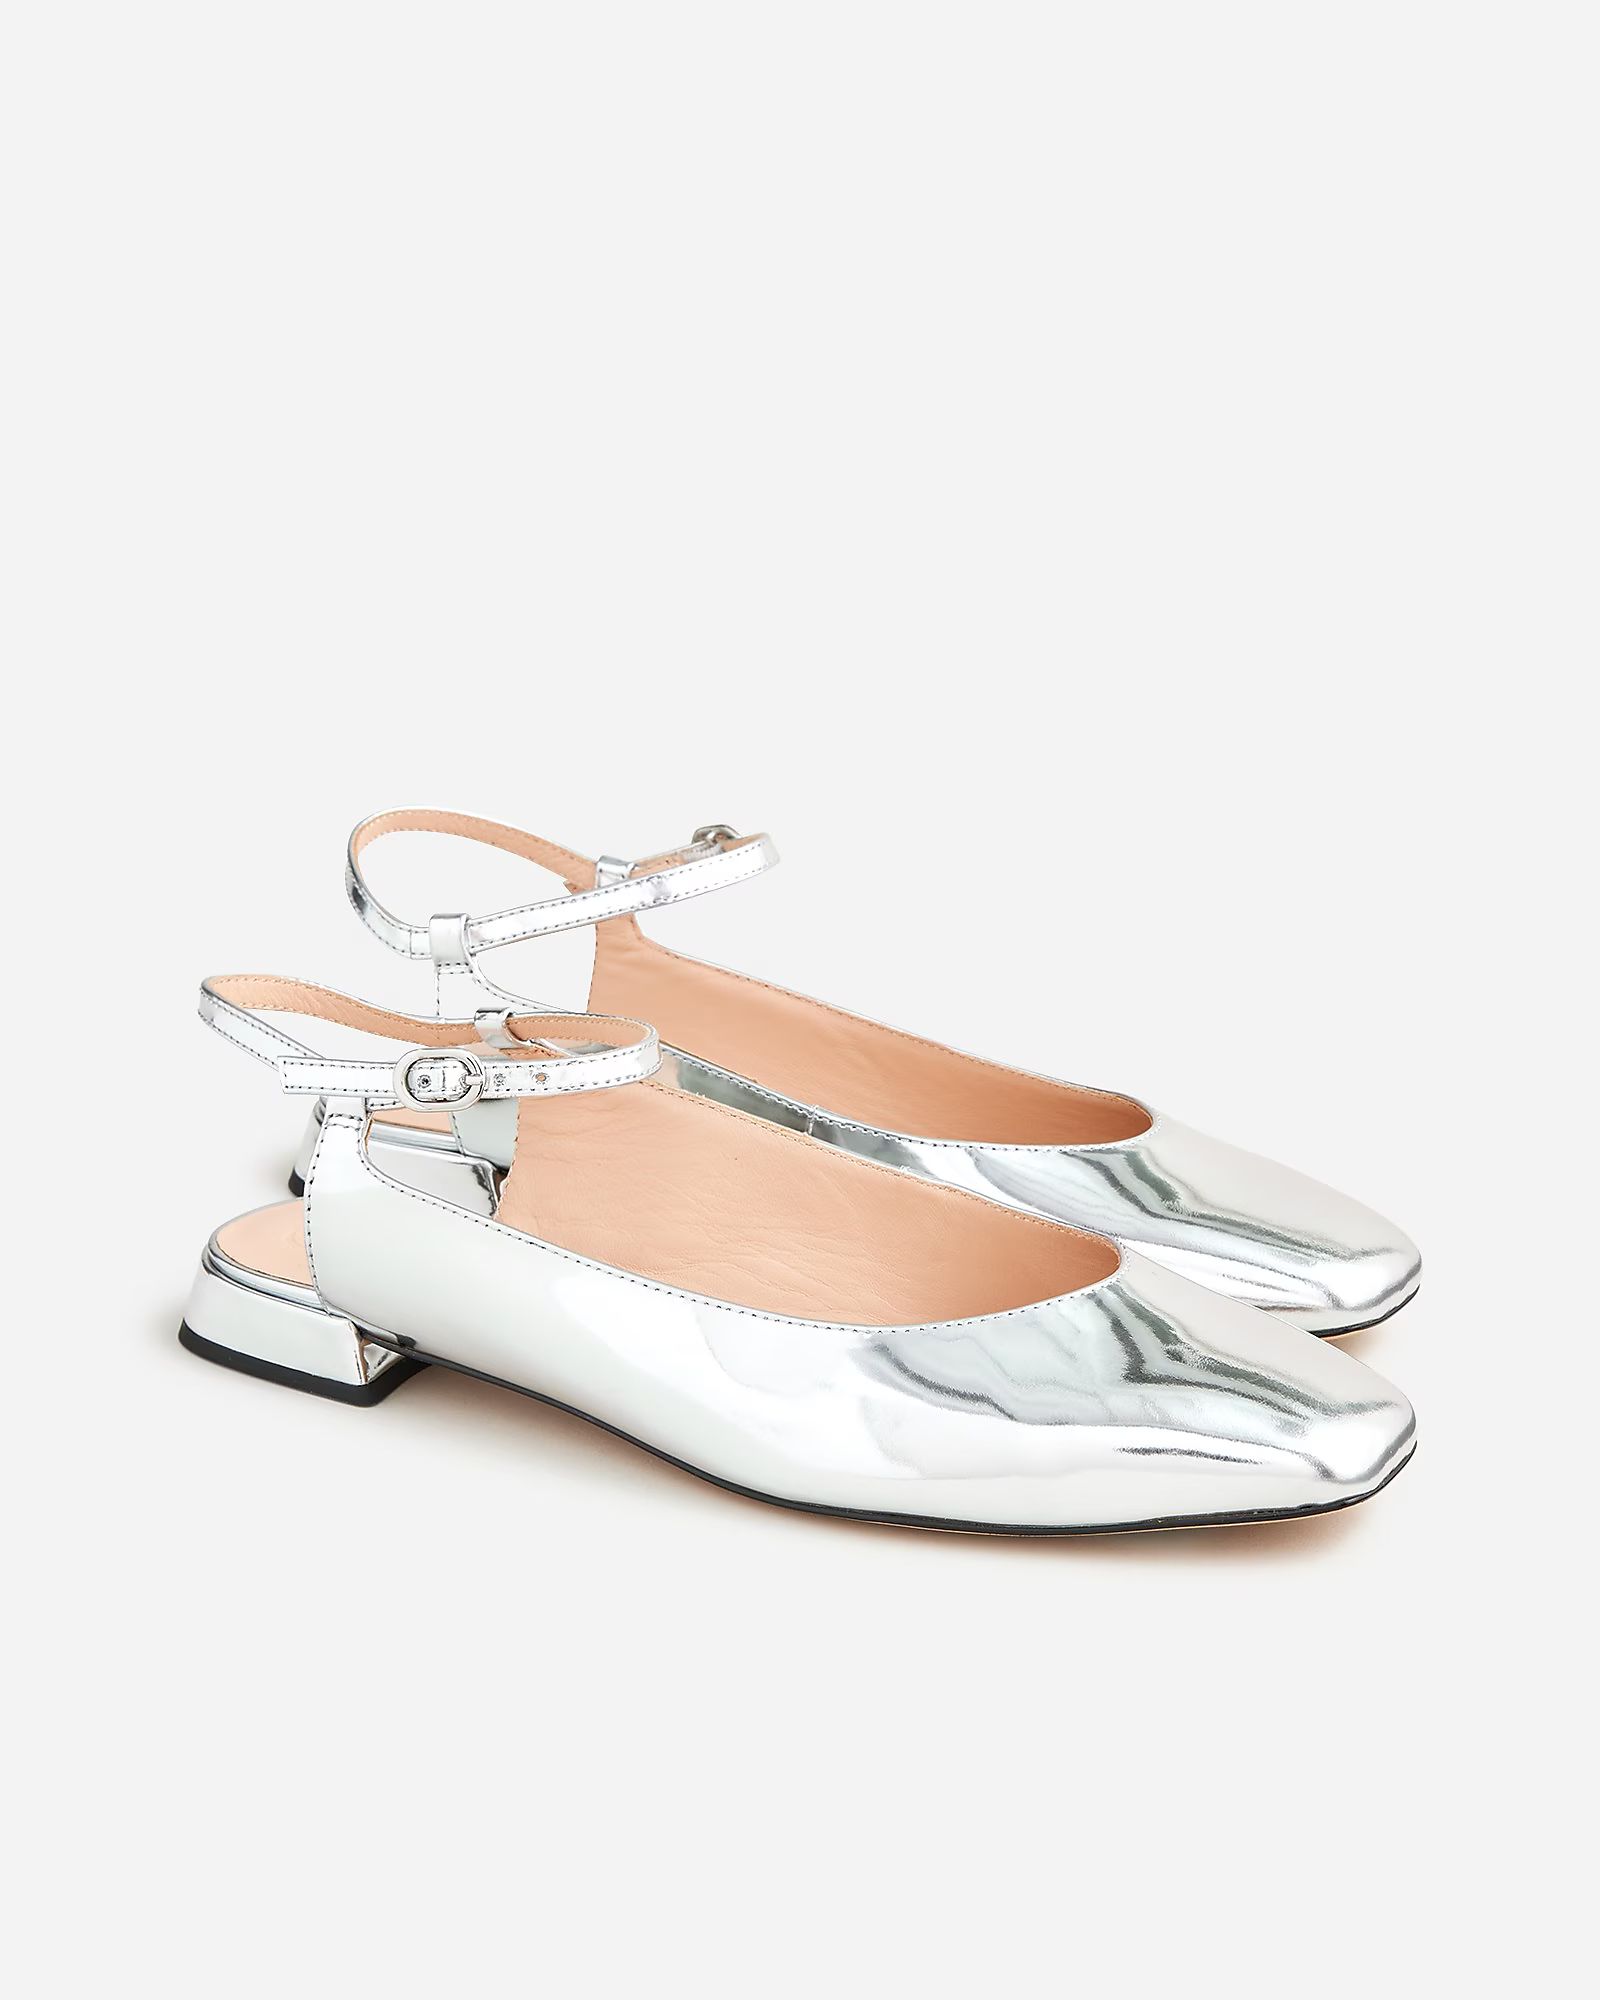 Ankle-strap flats in metallic leather | J.Crew US